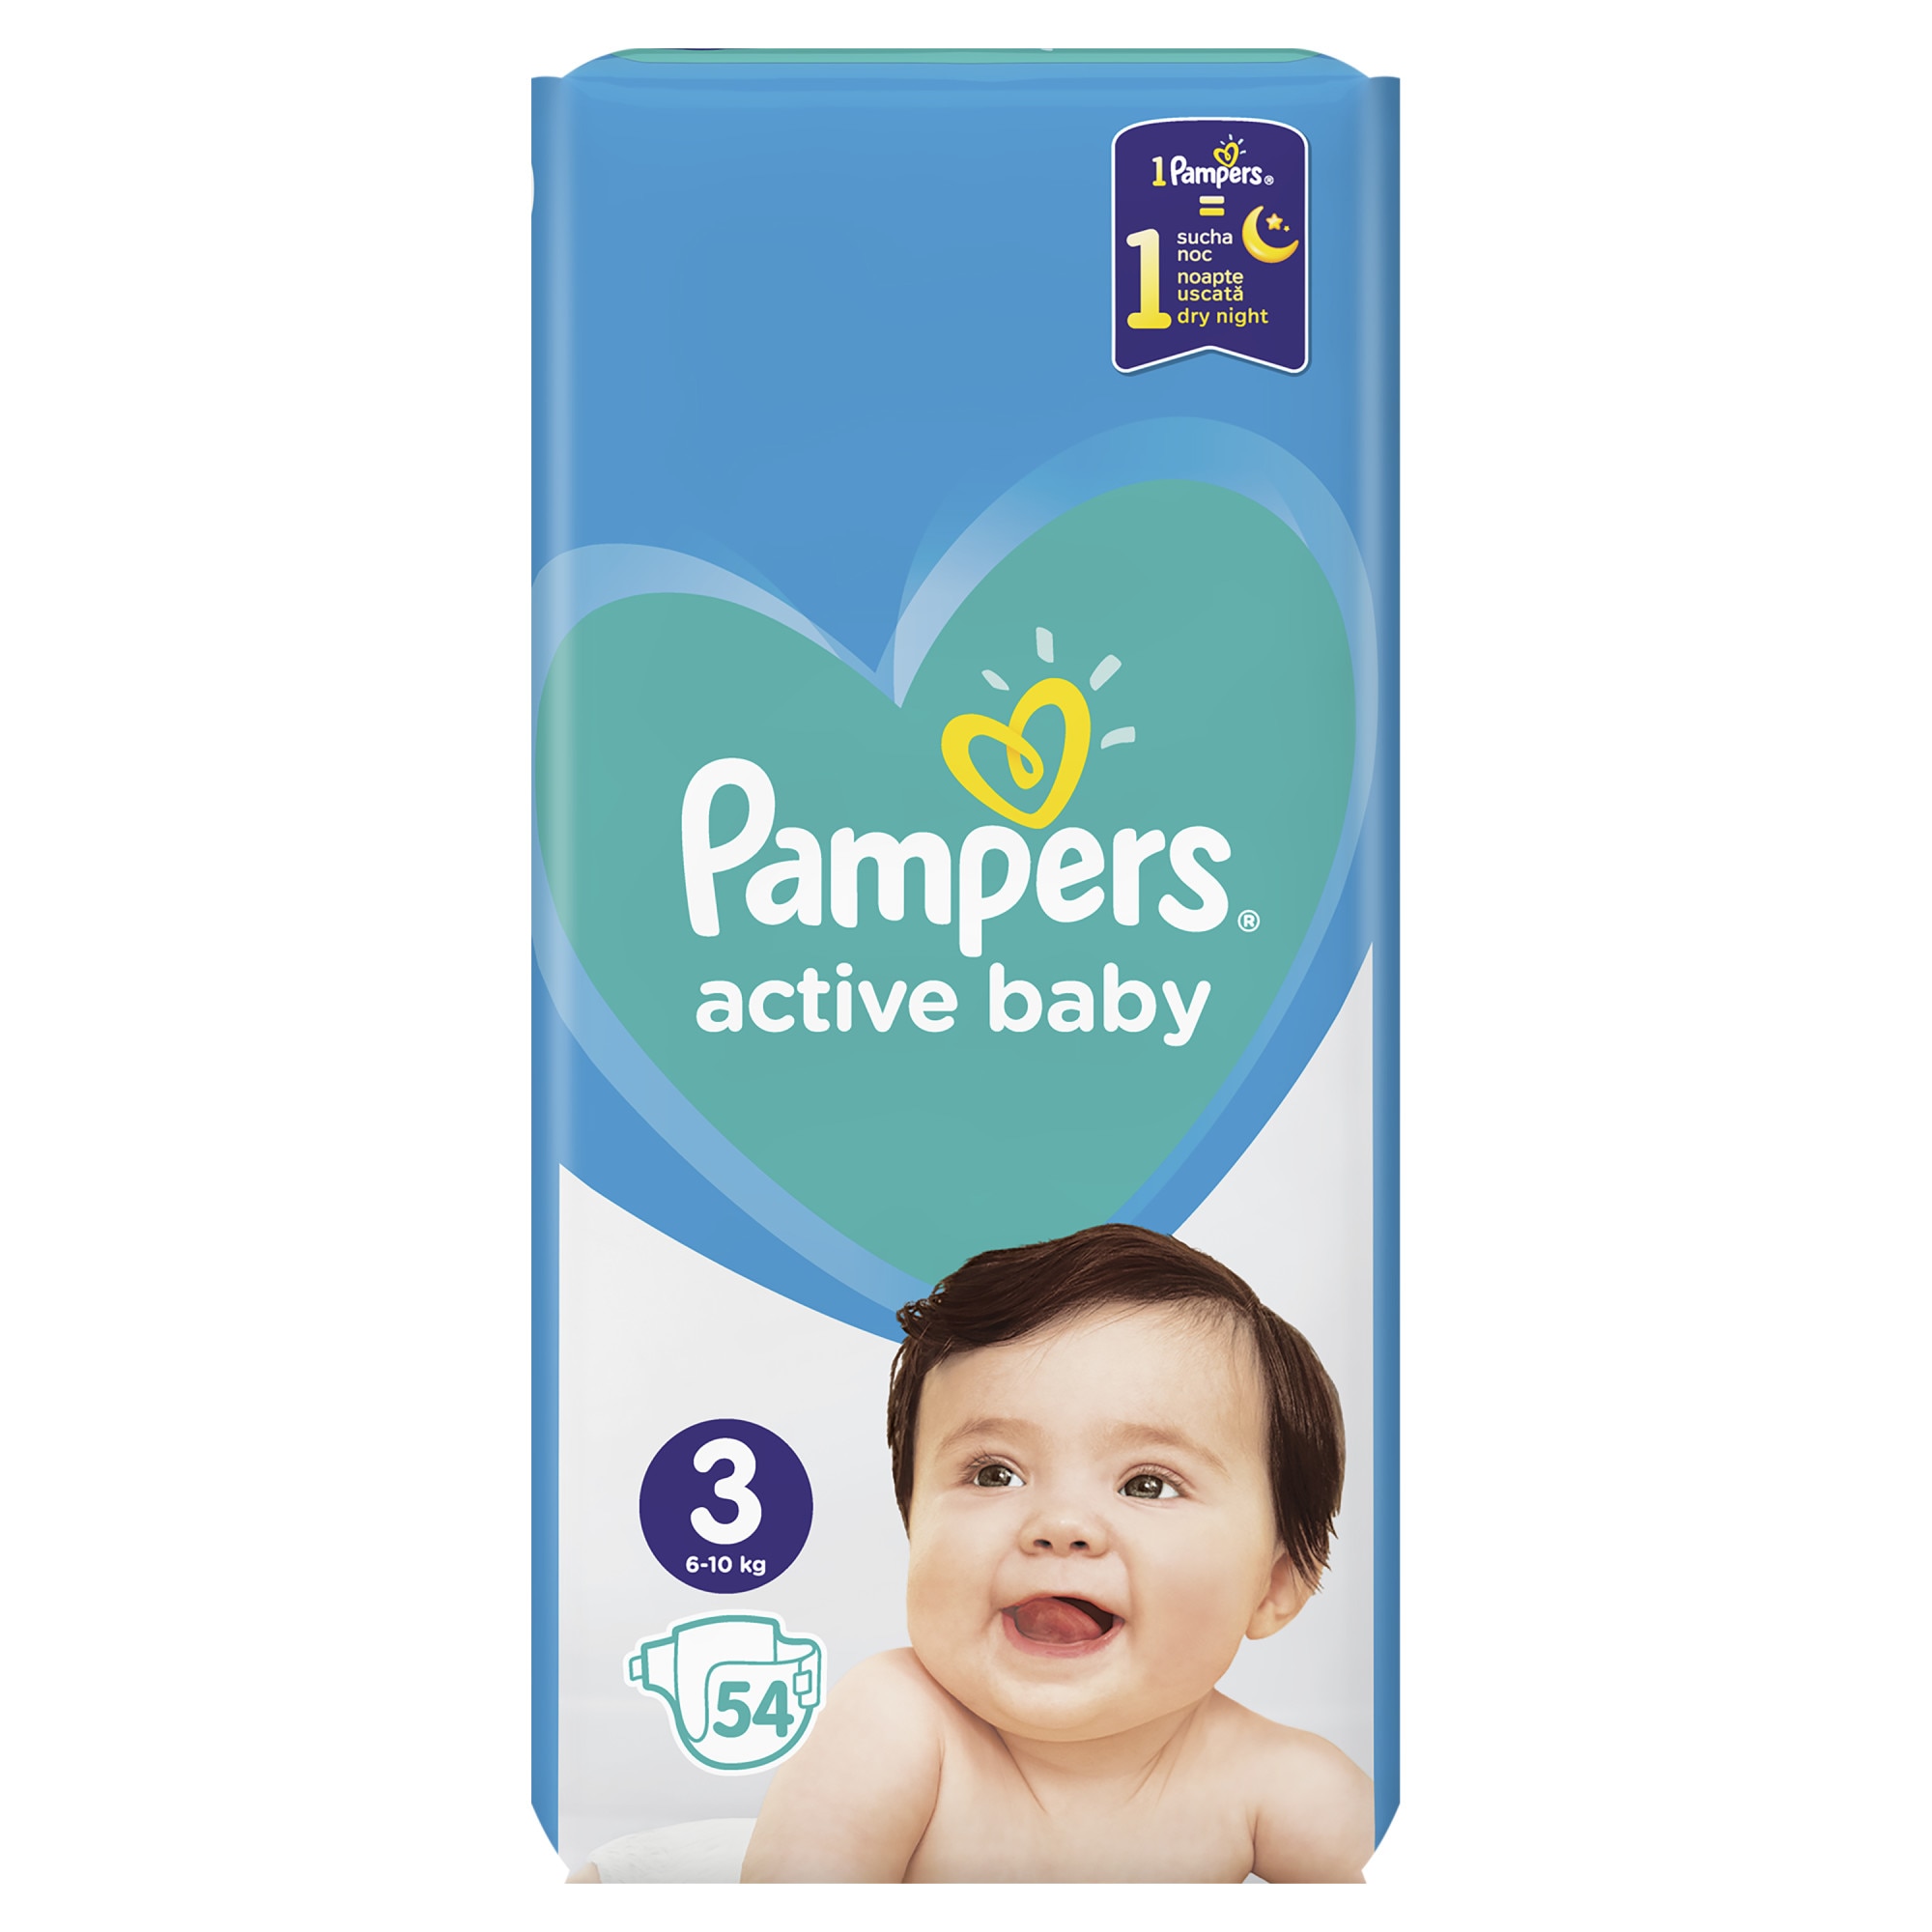 pampers care 3 cena